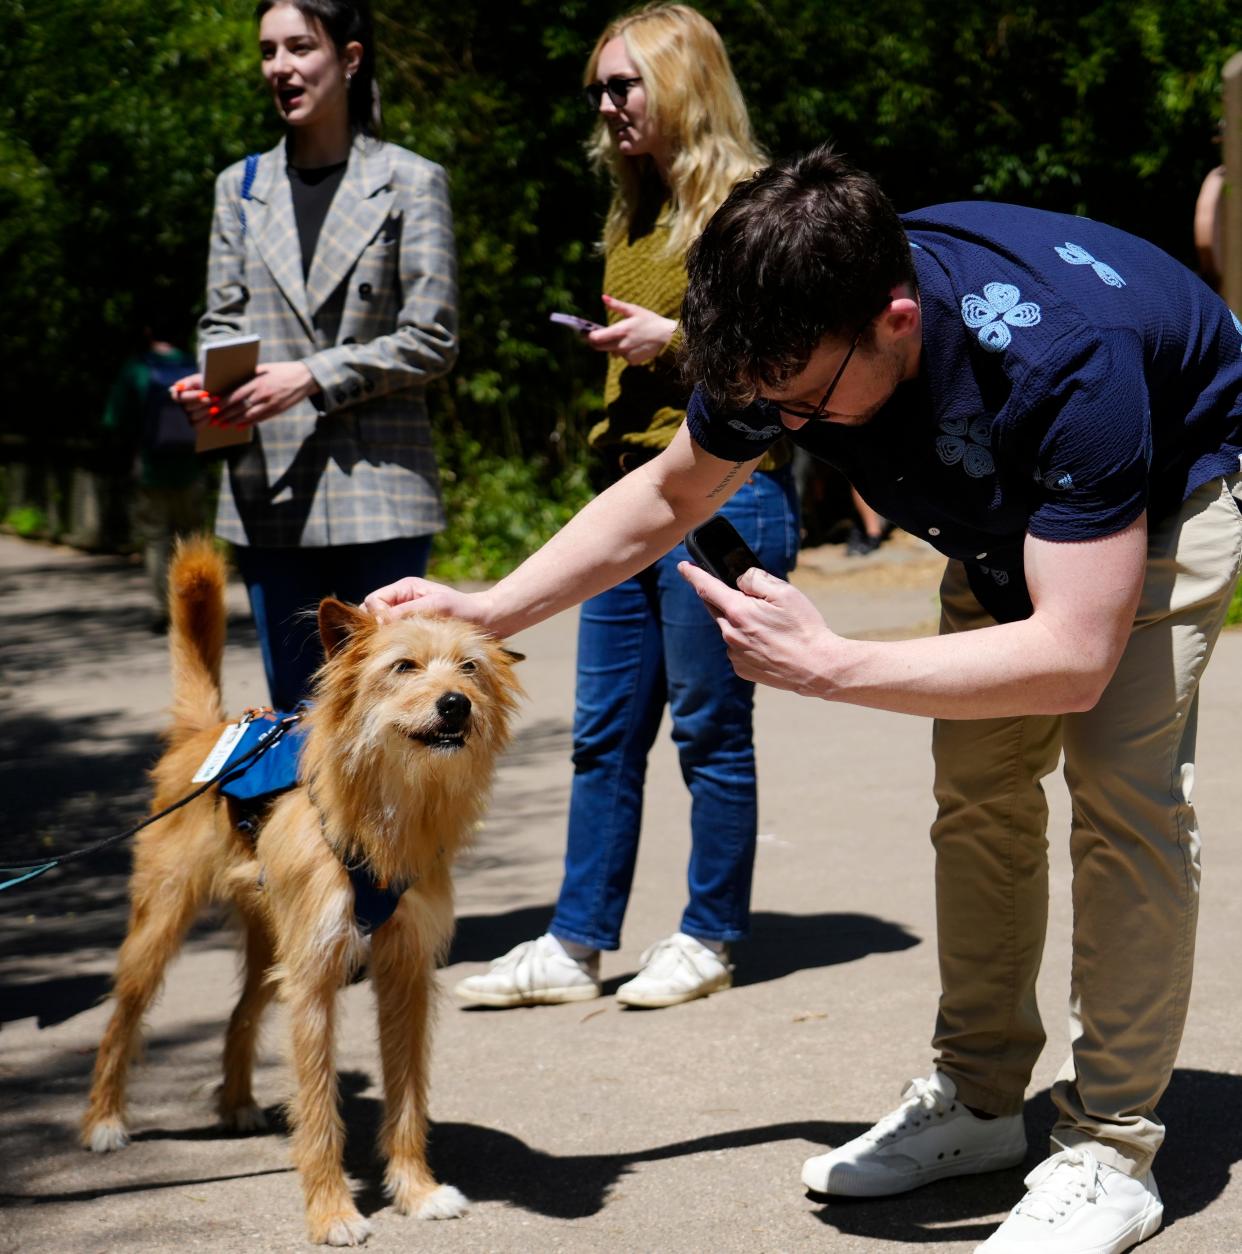 Trending news editor David Wysong takes video of Remus, a rescue dog from a local animal shelter that became a companion to a cheetah named Kris in 2019.